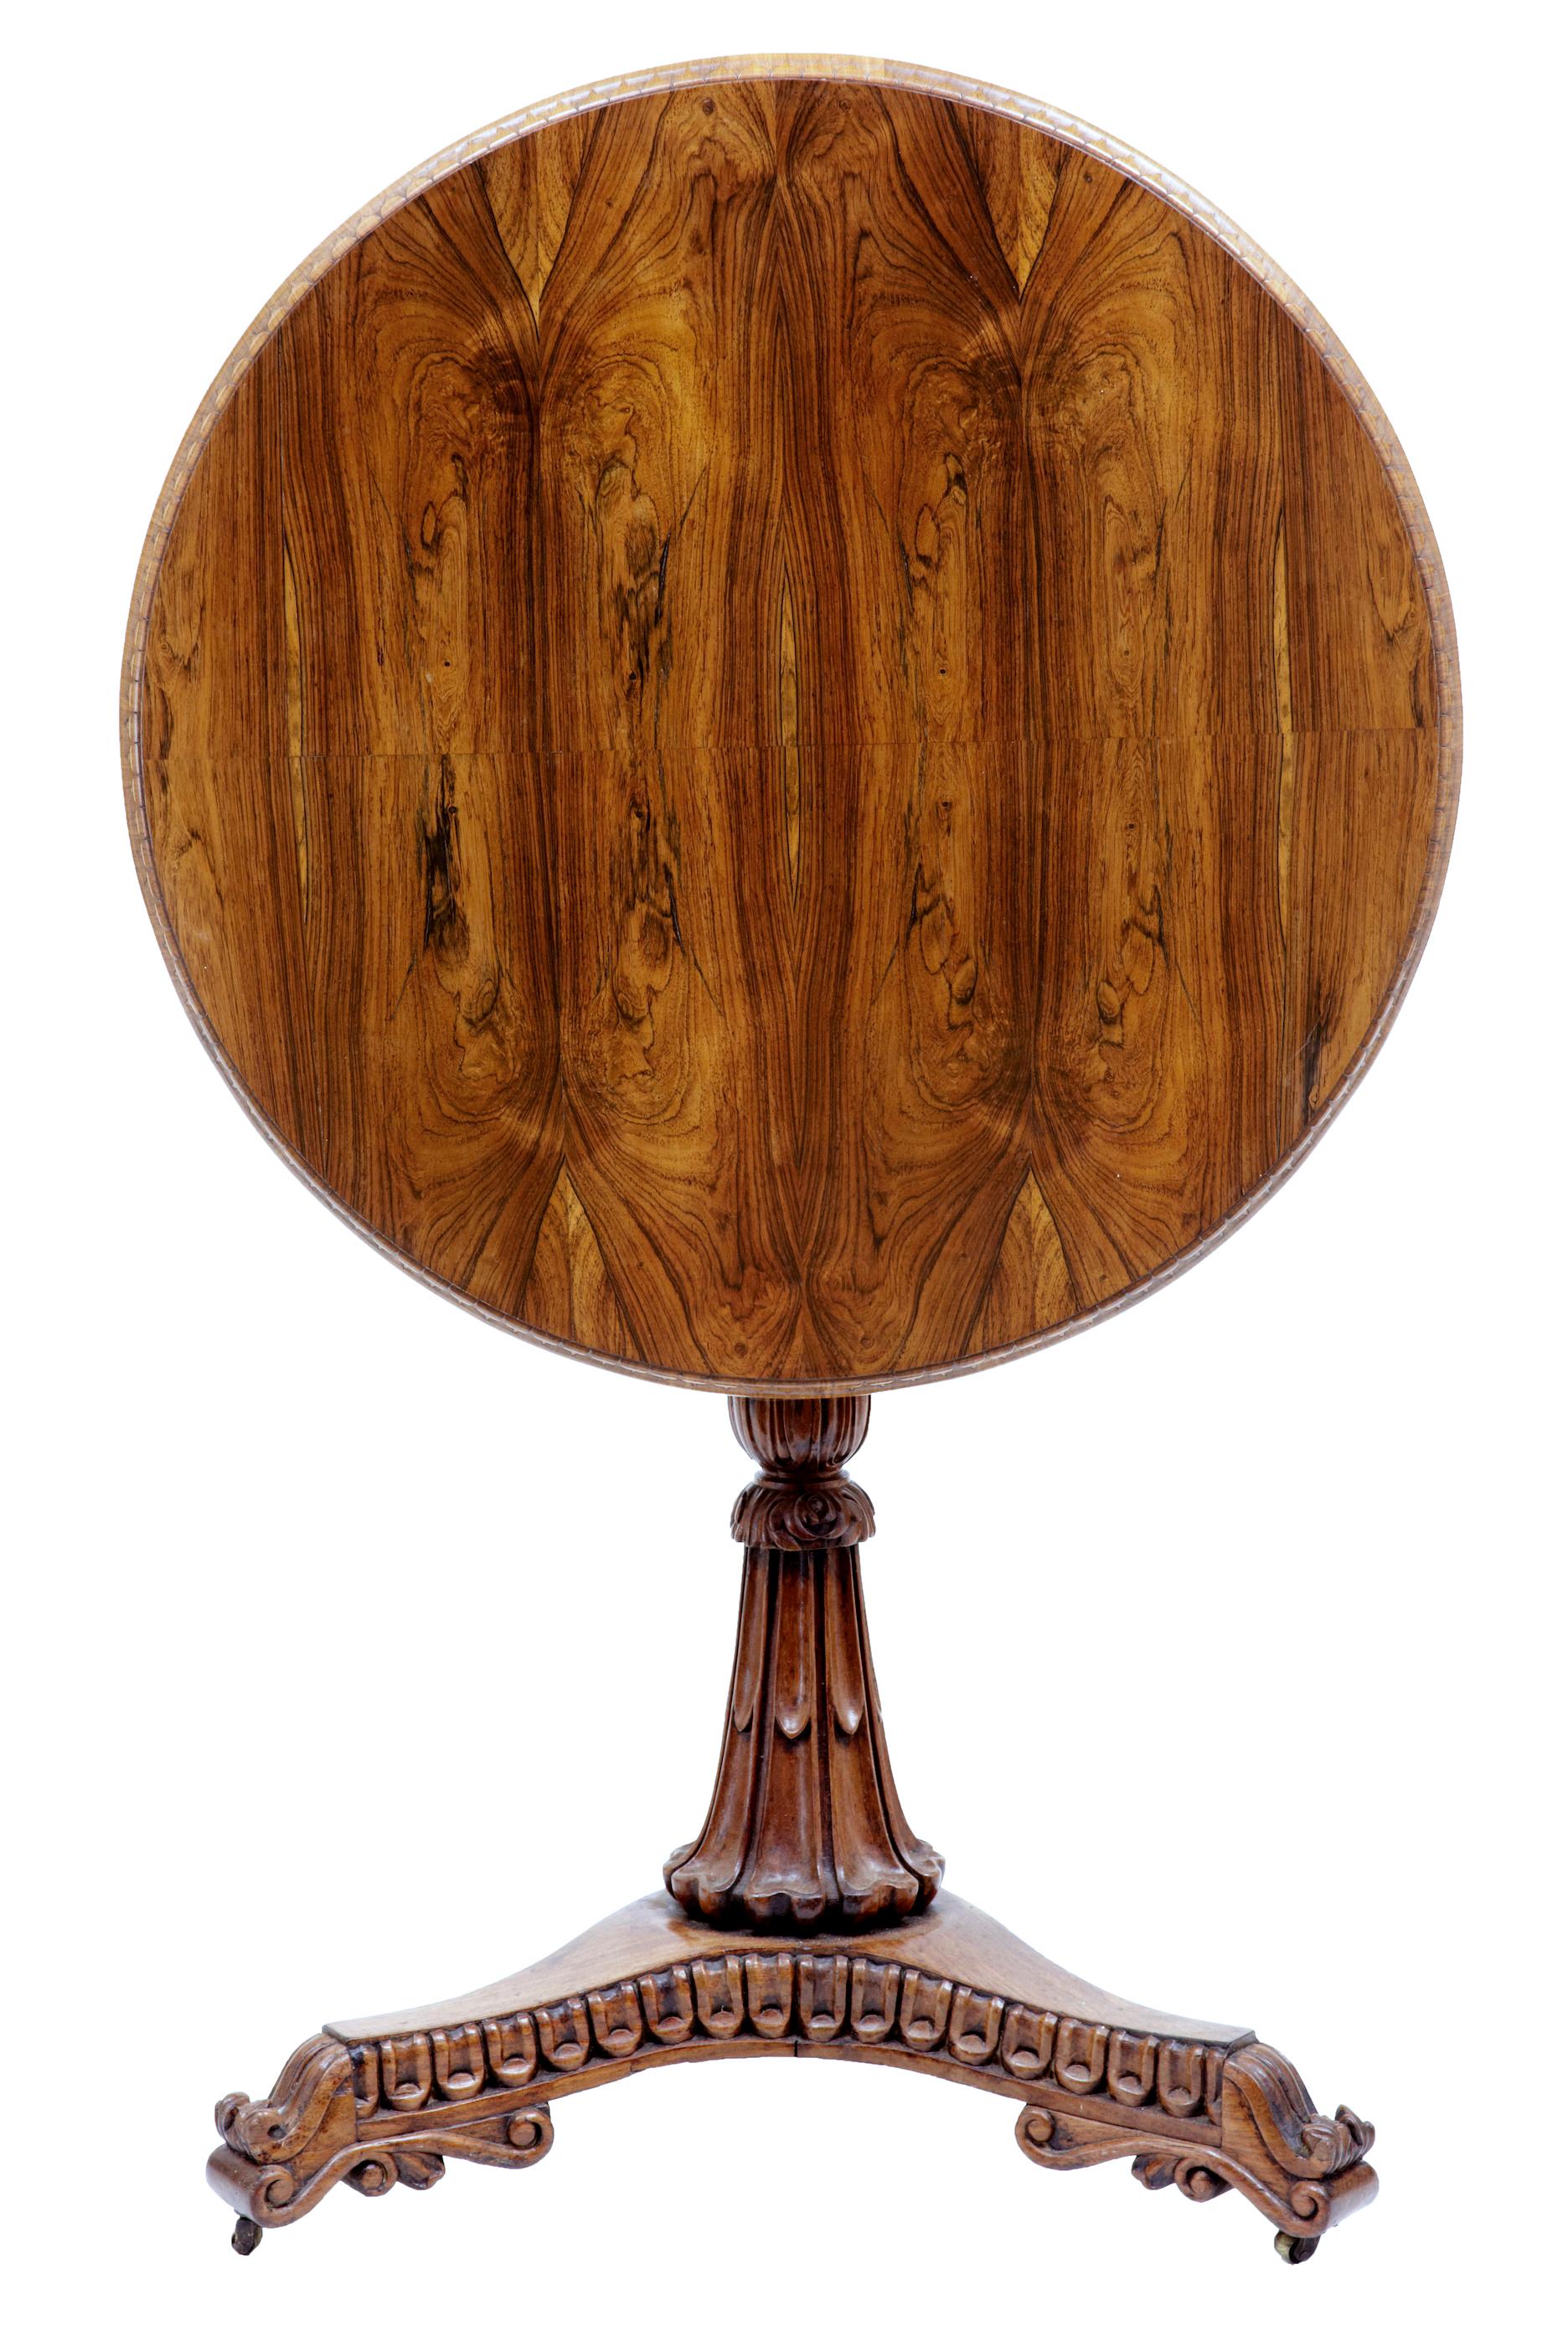 Circular occasional table veneered in striking palisander, decorated with a carved outer edge.

Turned and carved stem standing on a carved tripod base with scrolled feet and brass castors. Tilting top.

Rich golden color.

Minor surface marks